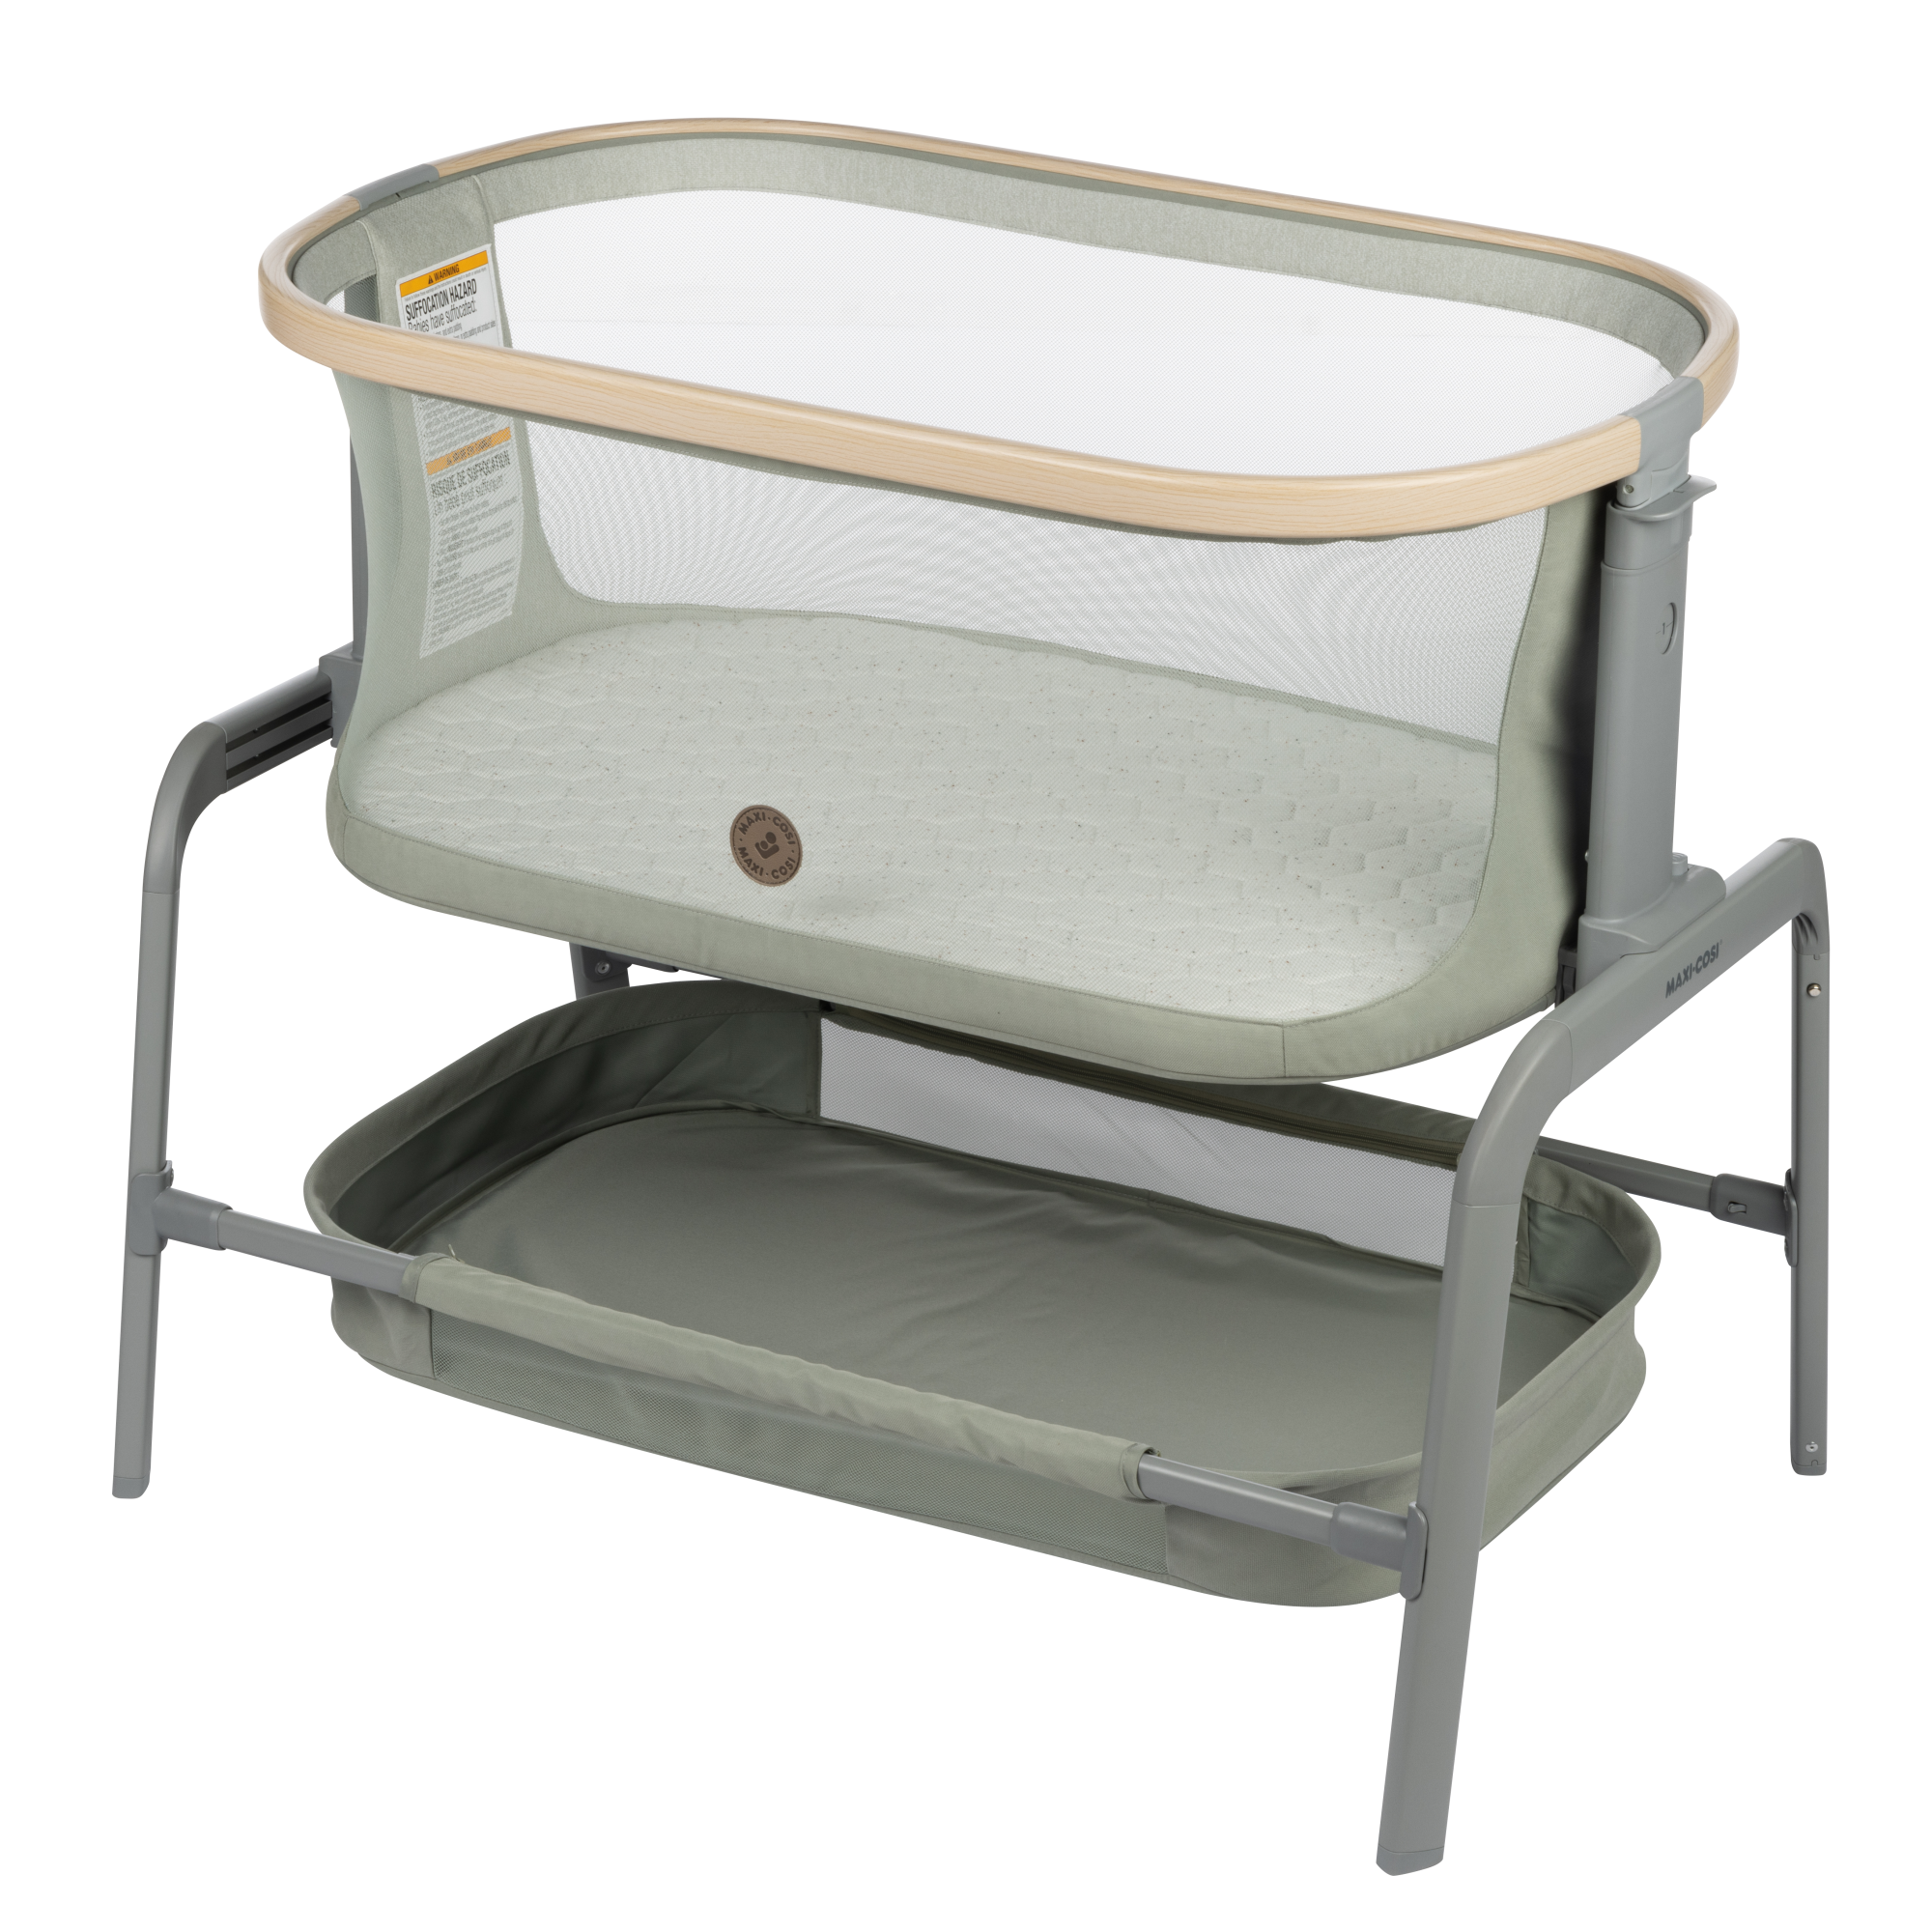 Iora Bedside Bassinet - Classic Green infographic: 4 height positions, breathable mesh sides, comfortable mattress, EcoCare fabrics, 3 slide positions, large storage basket, folds flat, includes travel bag